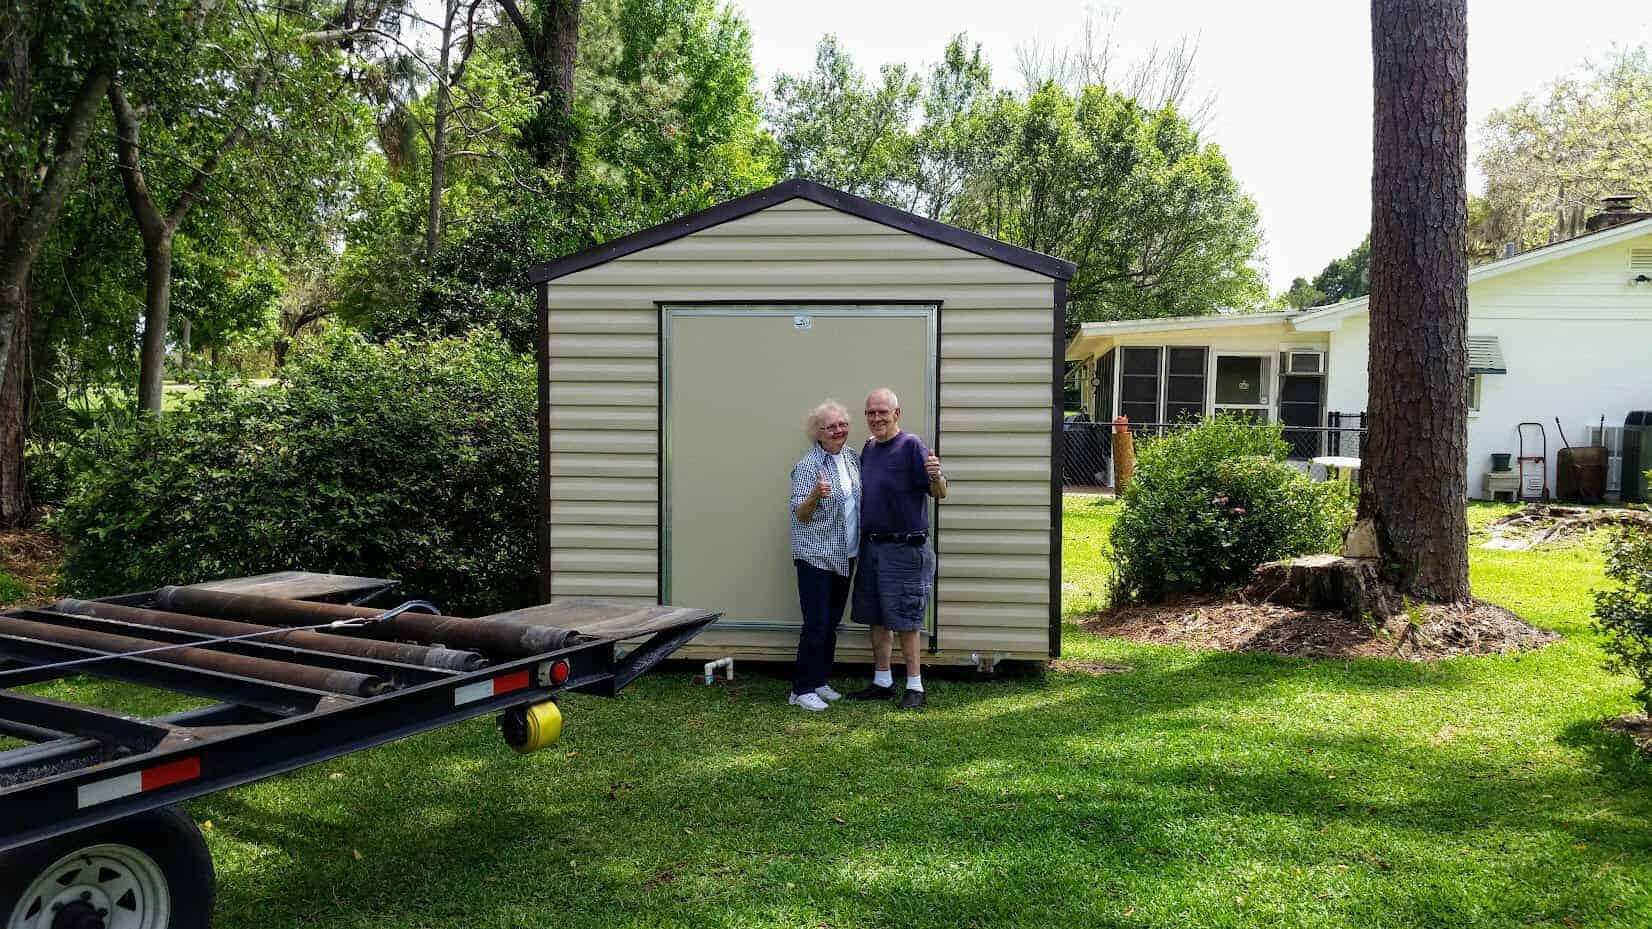 Get high-quality 12x24 sheds for sale and portable storage buildings at Robin Sheds. Our 12x24 storage sheds are perfect for your outdoor storage needs. Find the best 12x24 shed dealer near you on our website. Explore our 12x24 outdoor storage building collection now!